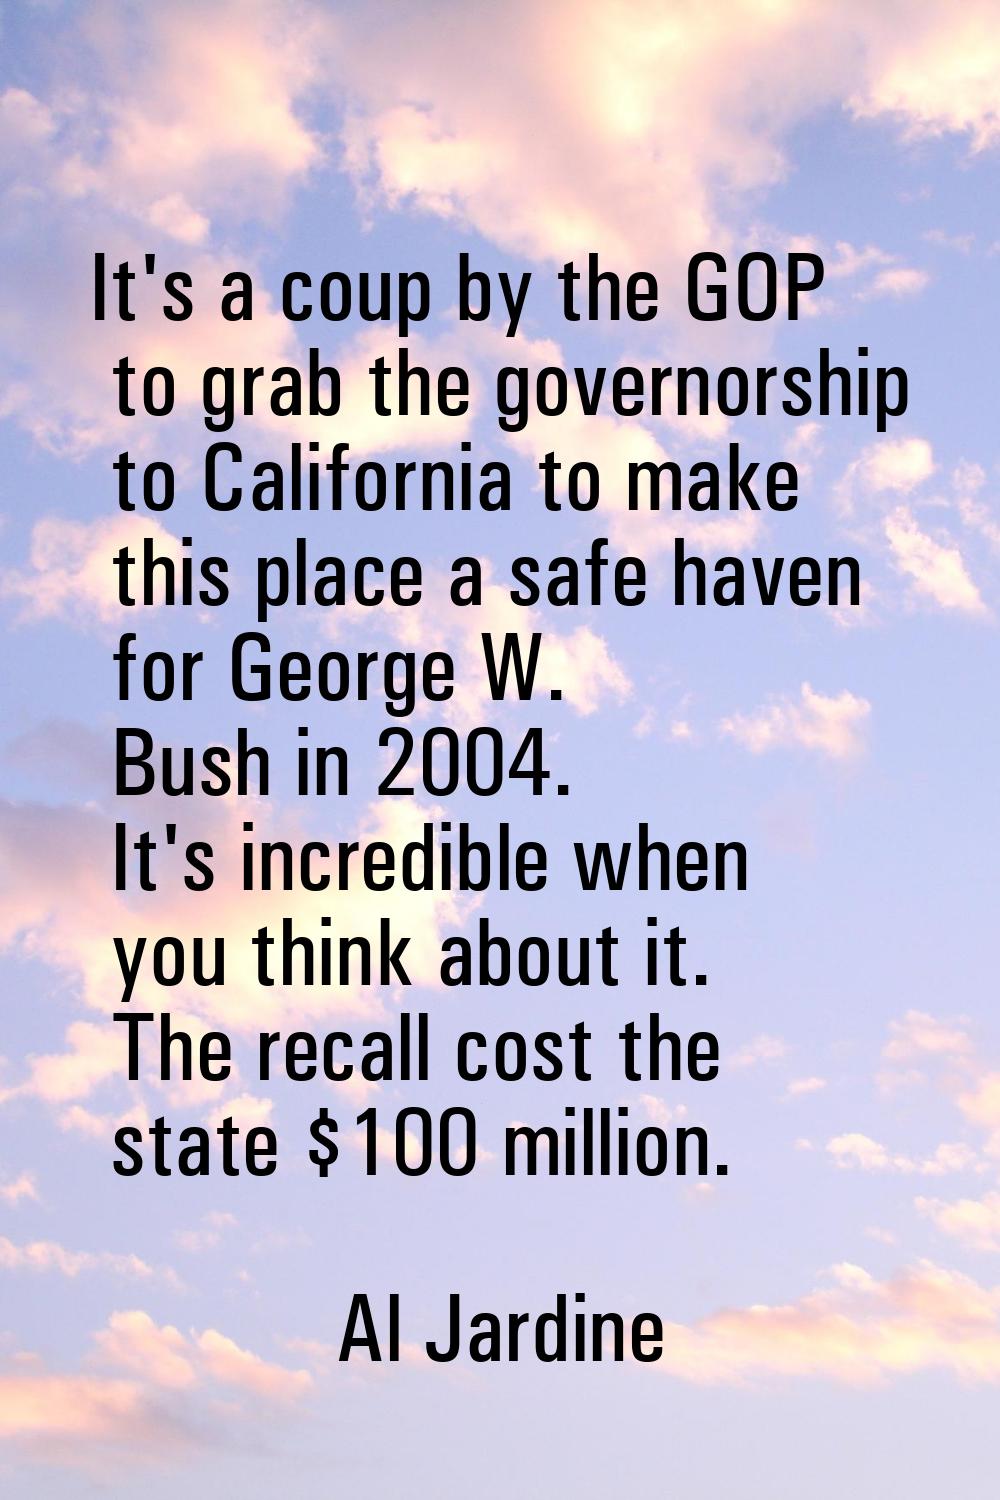 It's a coup by the GOP to grab the governorship to California to make this place a safe haven for G